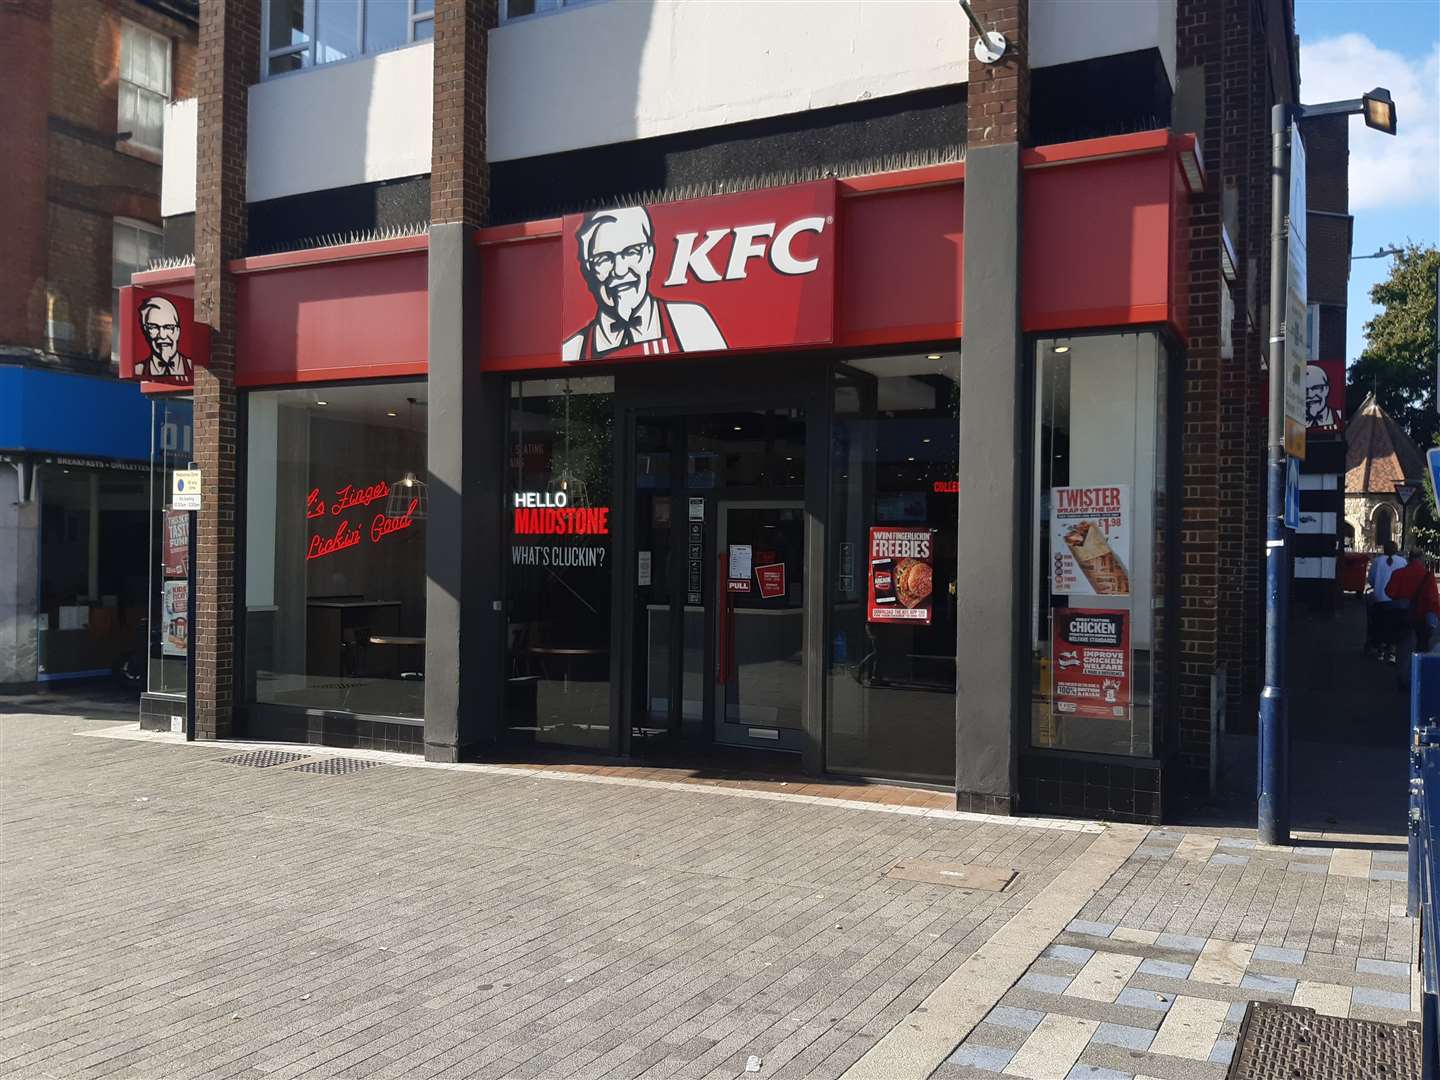 Jeffery and White caused more than £12,000 of damage to the KFC in Week Street, Maidstone